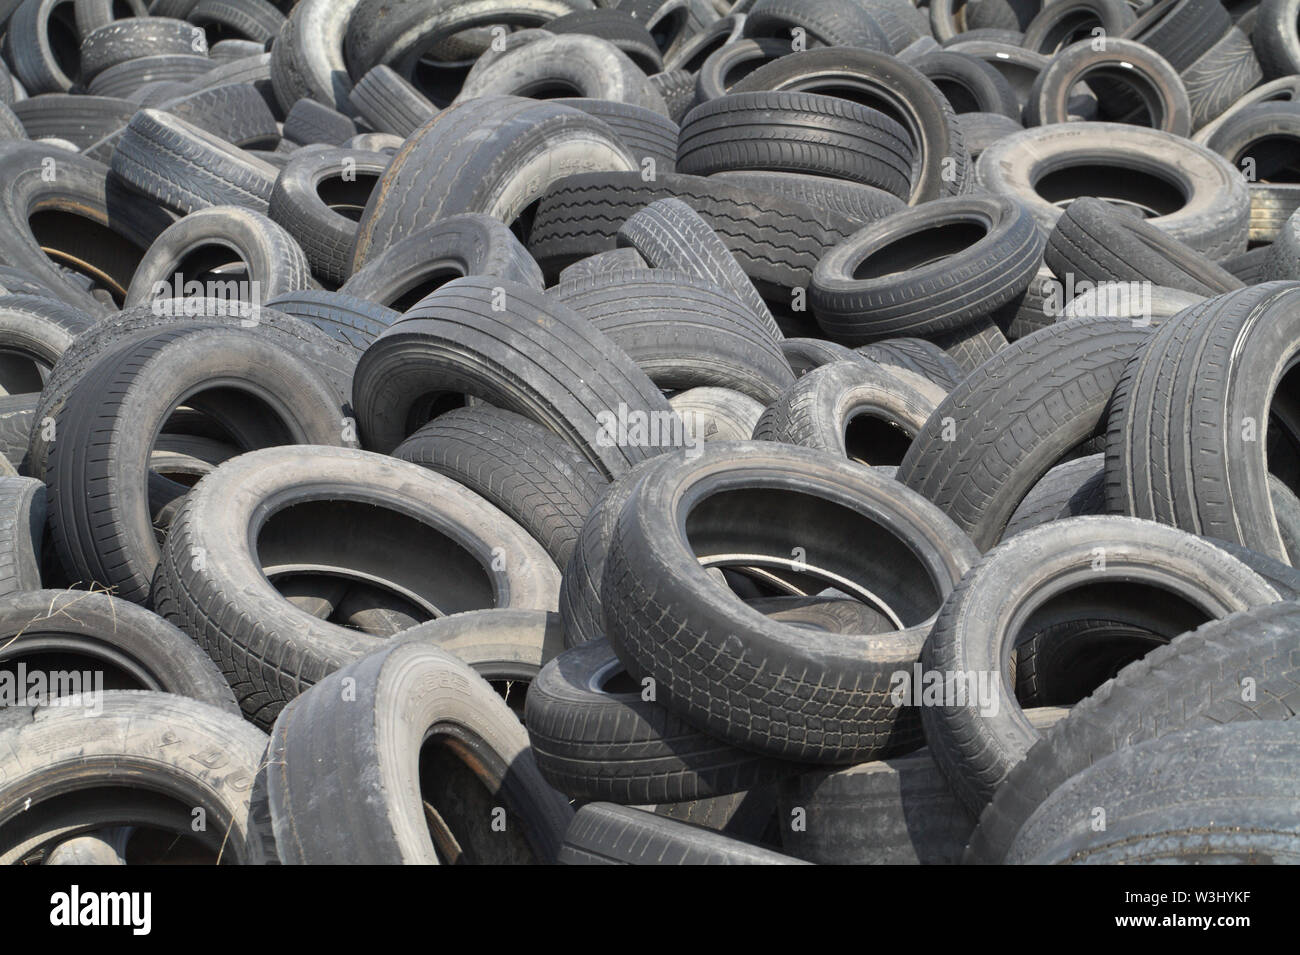 A picture of old worn tires Stock Photo